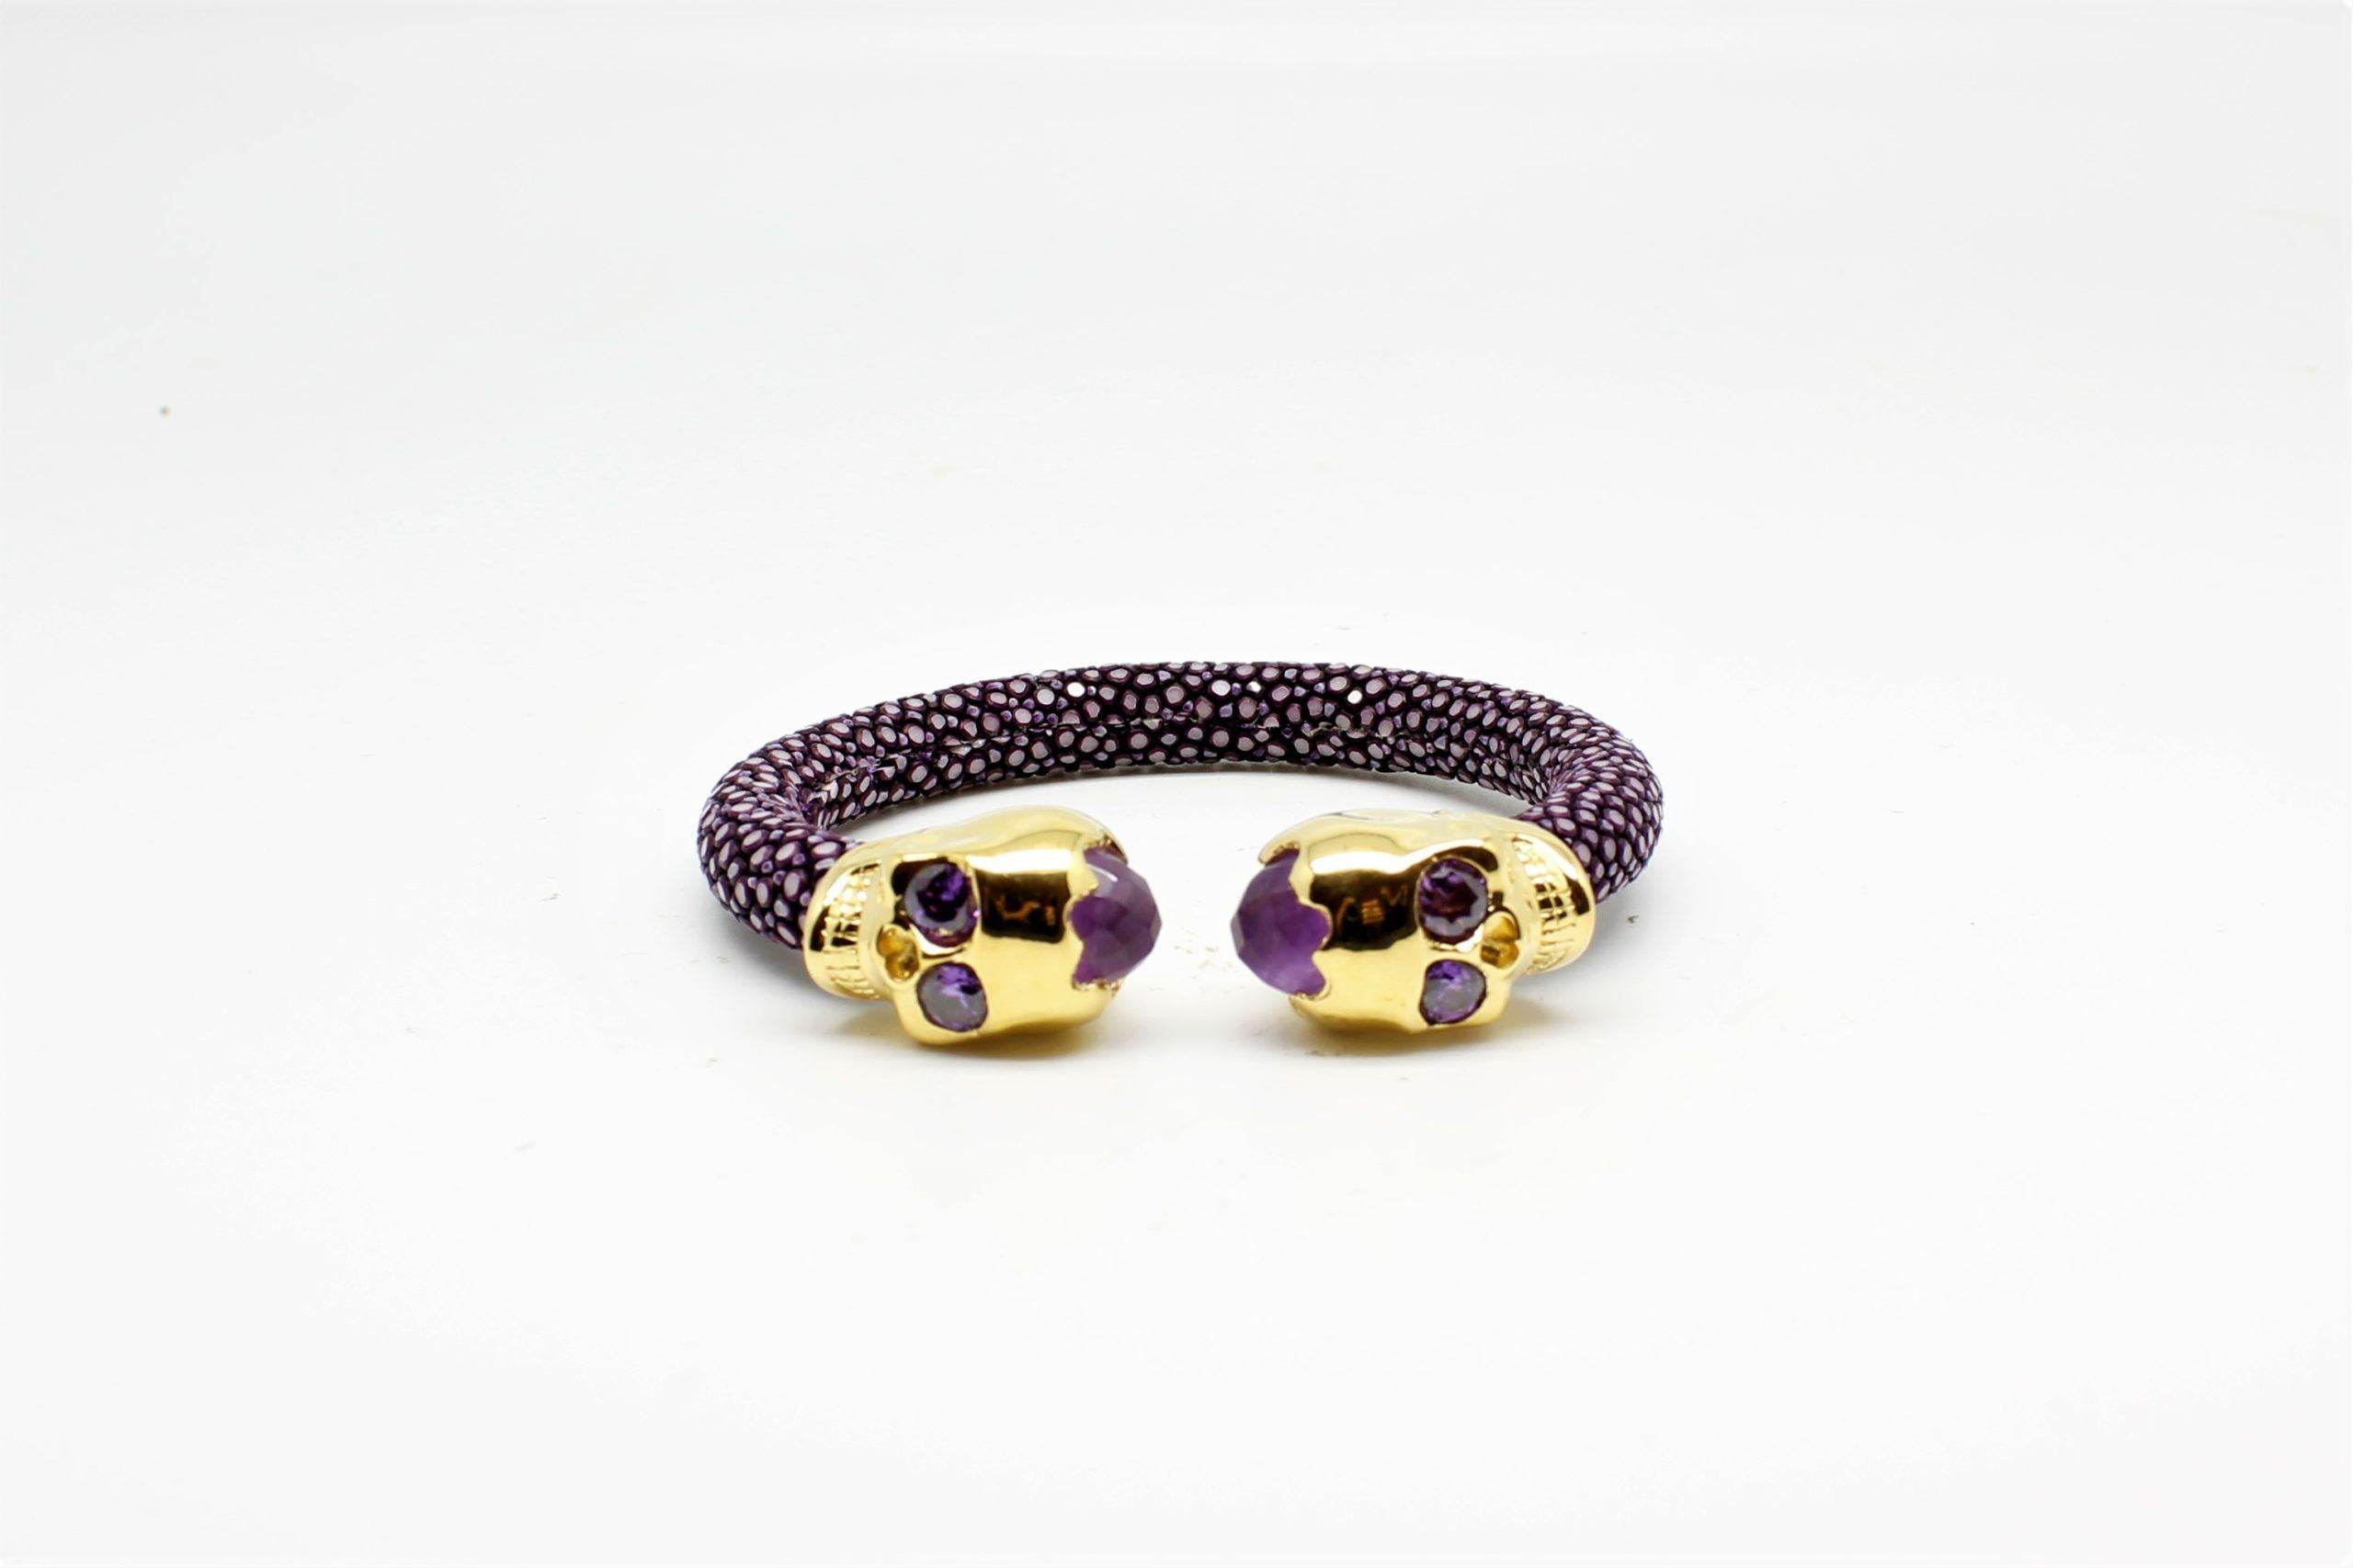 Maroon Galuchat Skin Bangle Bracelet with Skull Gold-Plated & Coral Stones 3